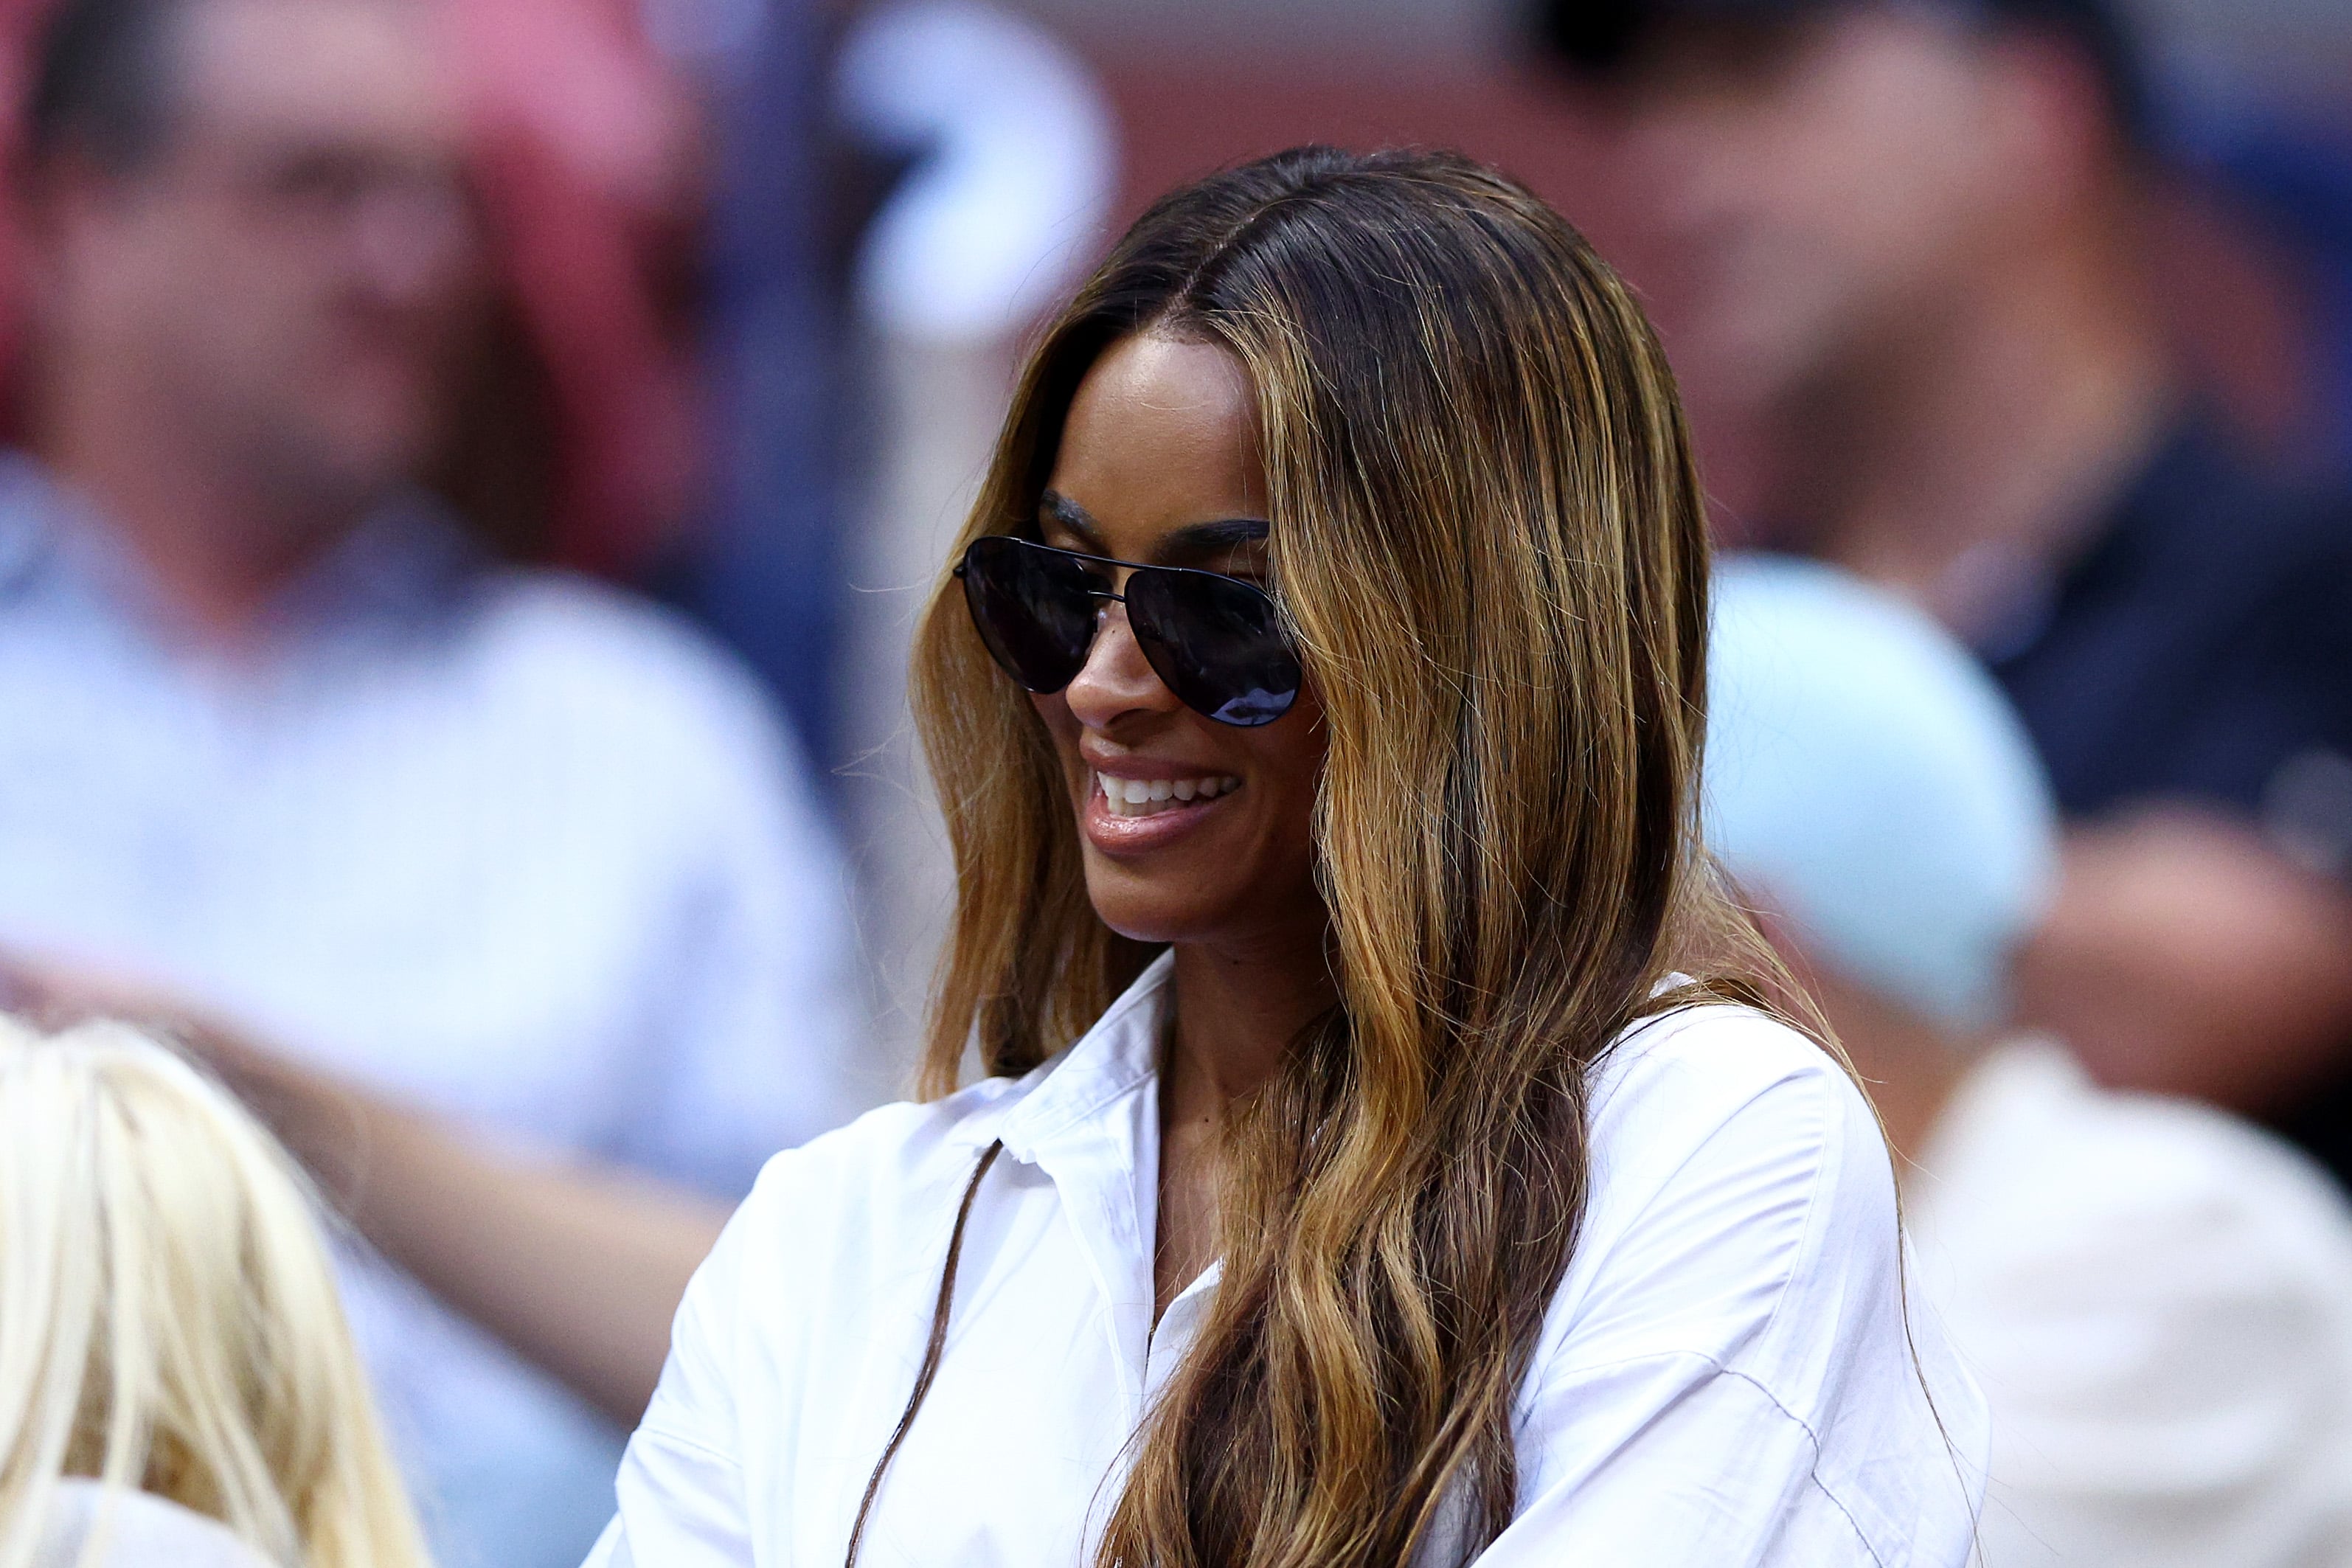 Zendaya looked effortlessly chic cheering Serena Williams at the